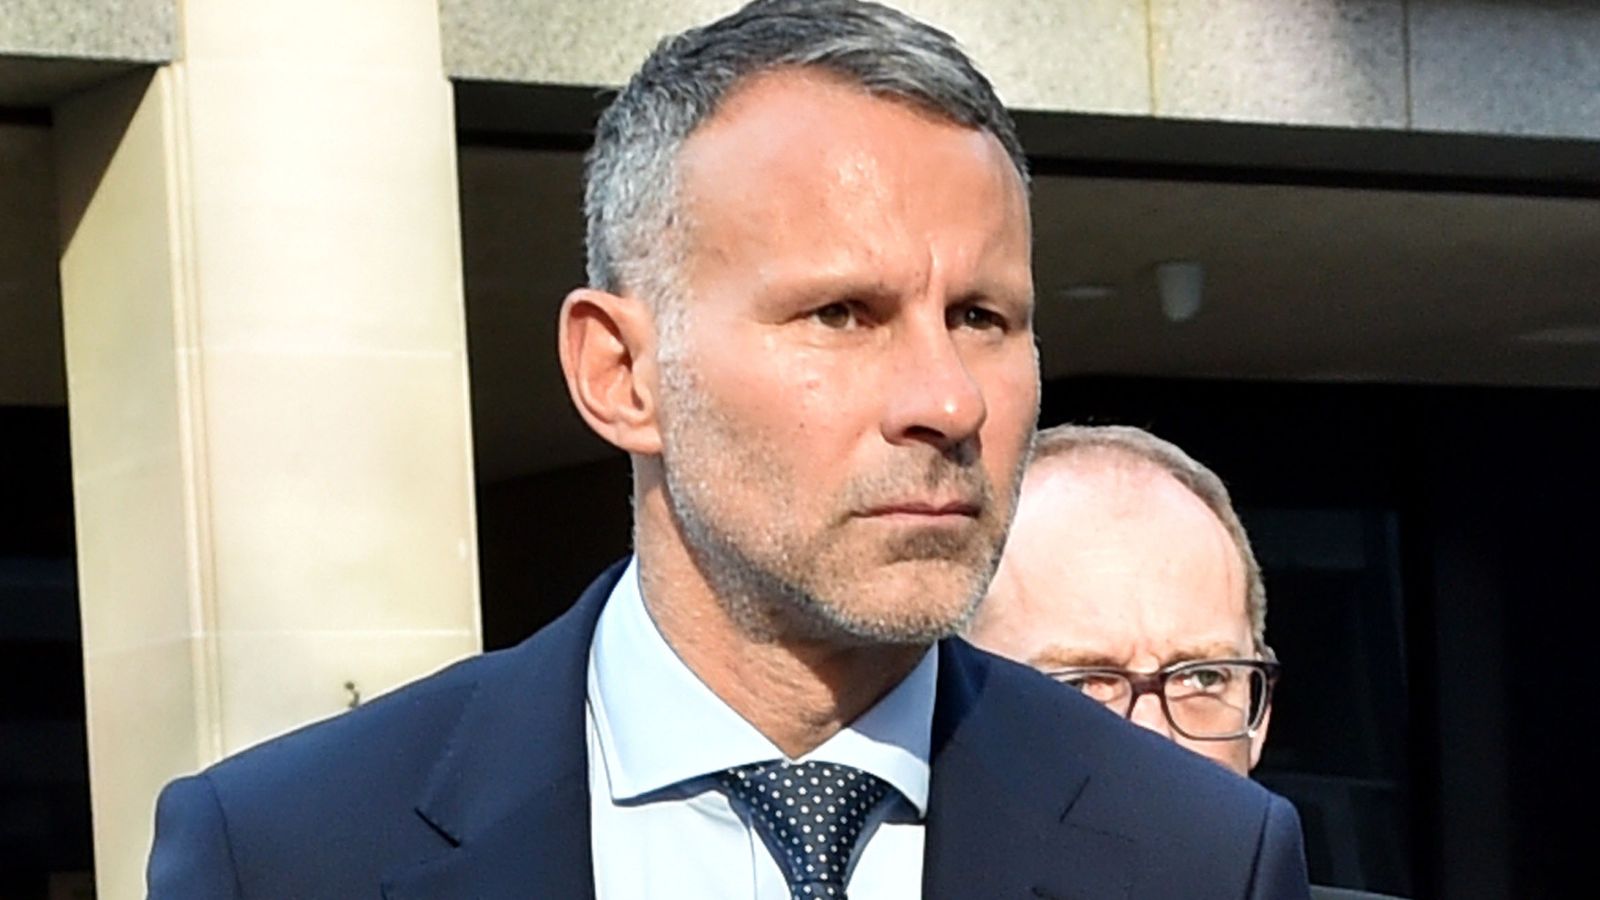 Ryan Giggs trial: Former footballer’s ex-girlfriend says staged photo was to ‘take back control’